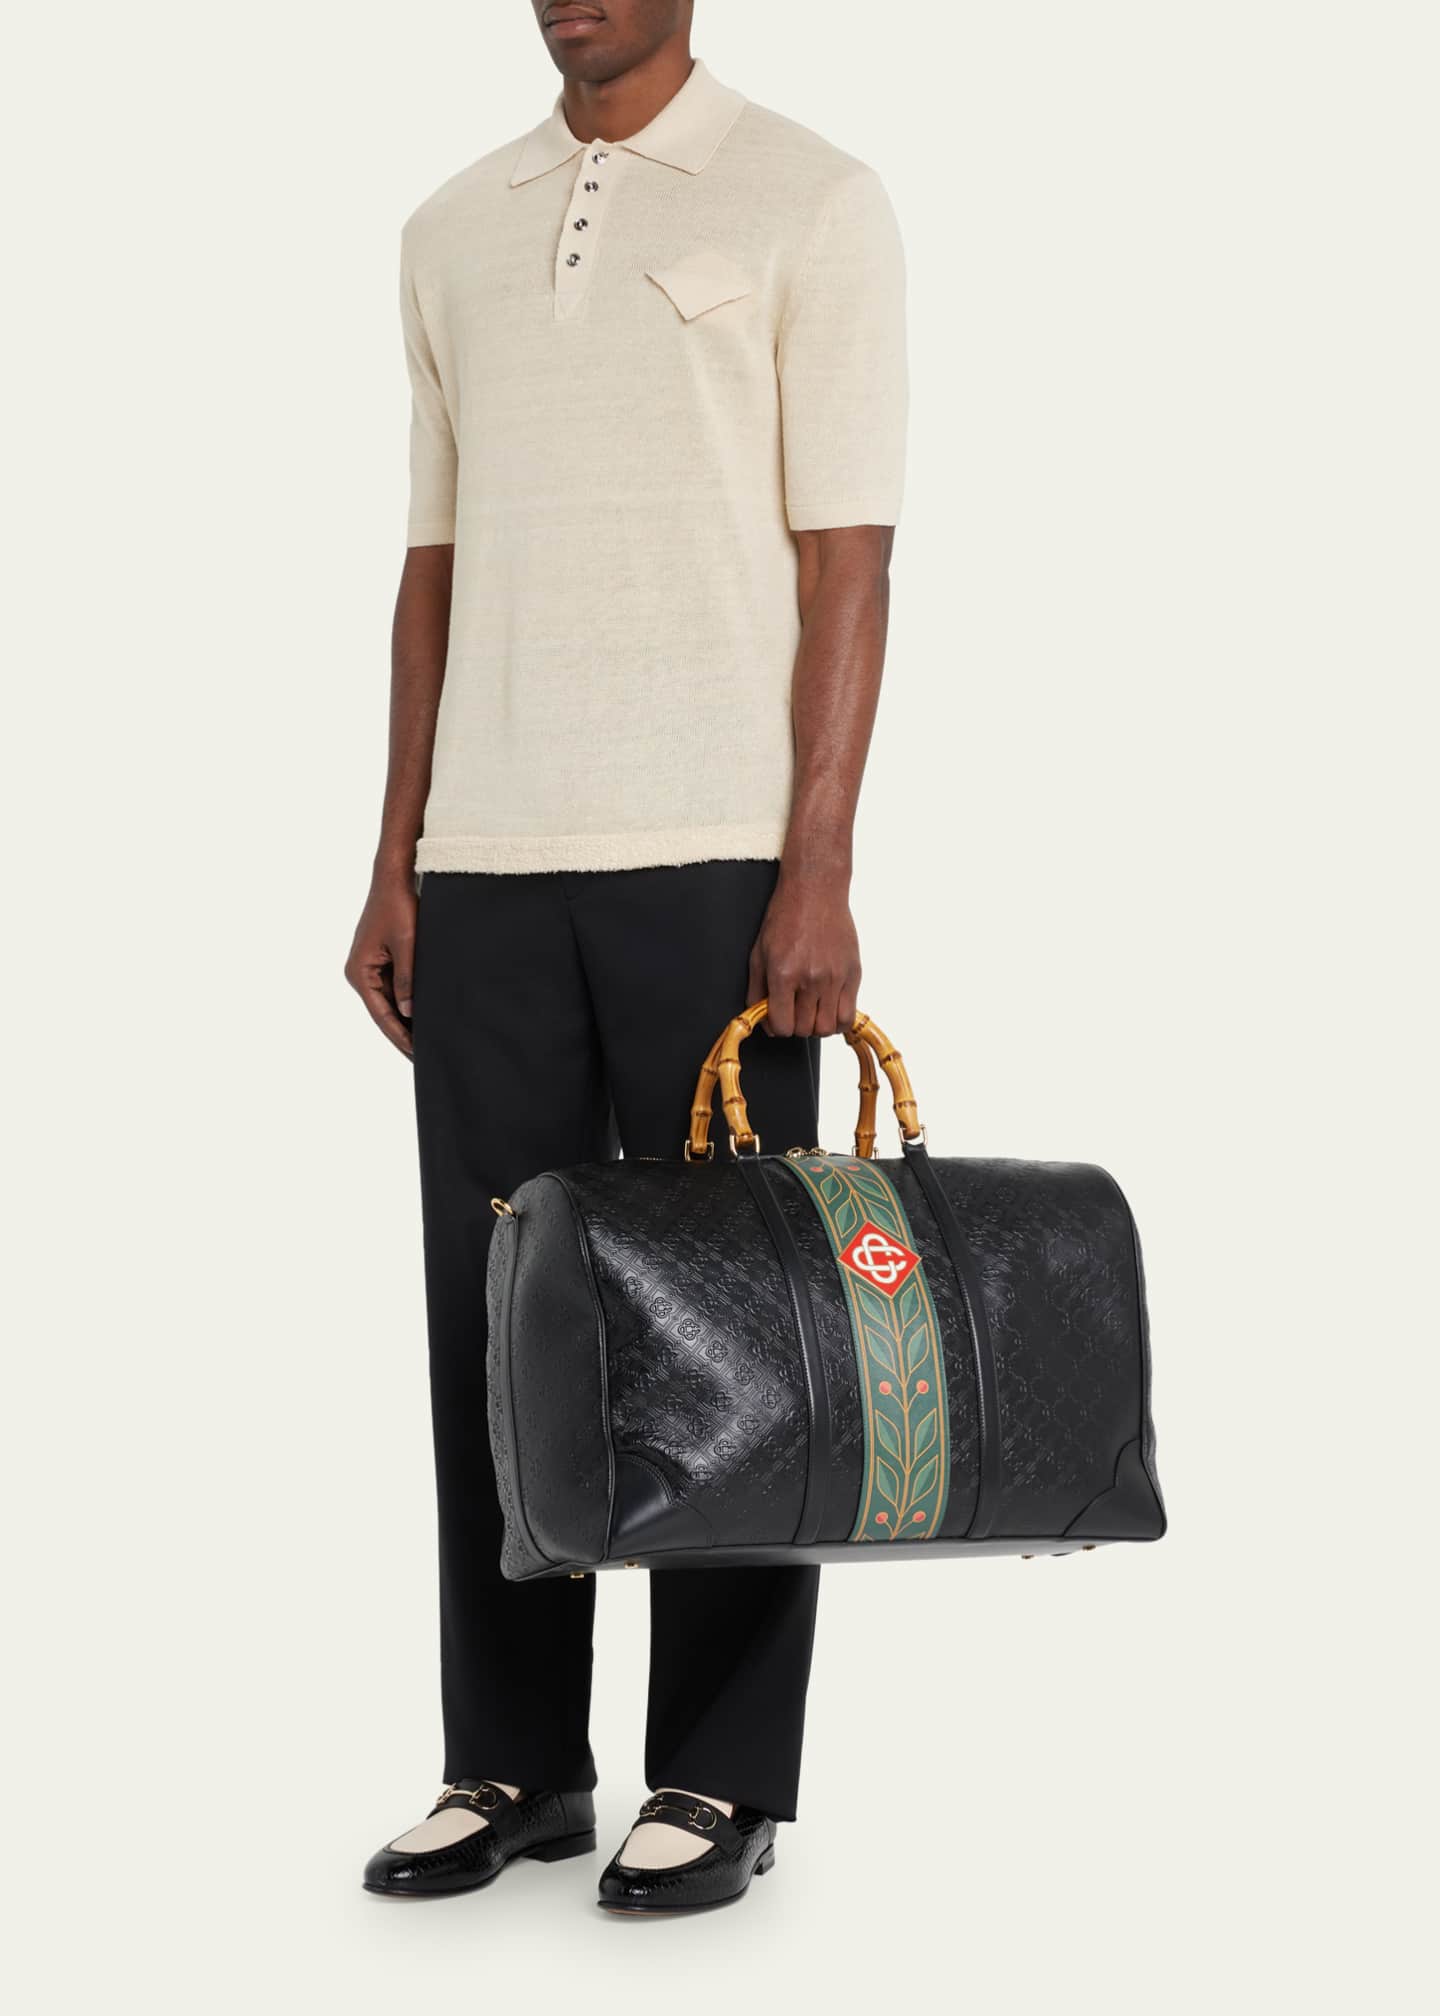 Gucci GG Supreme Backpack with Travel Patches - Bergdorf Goodman